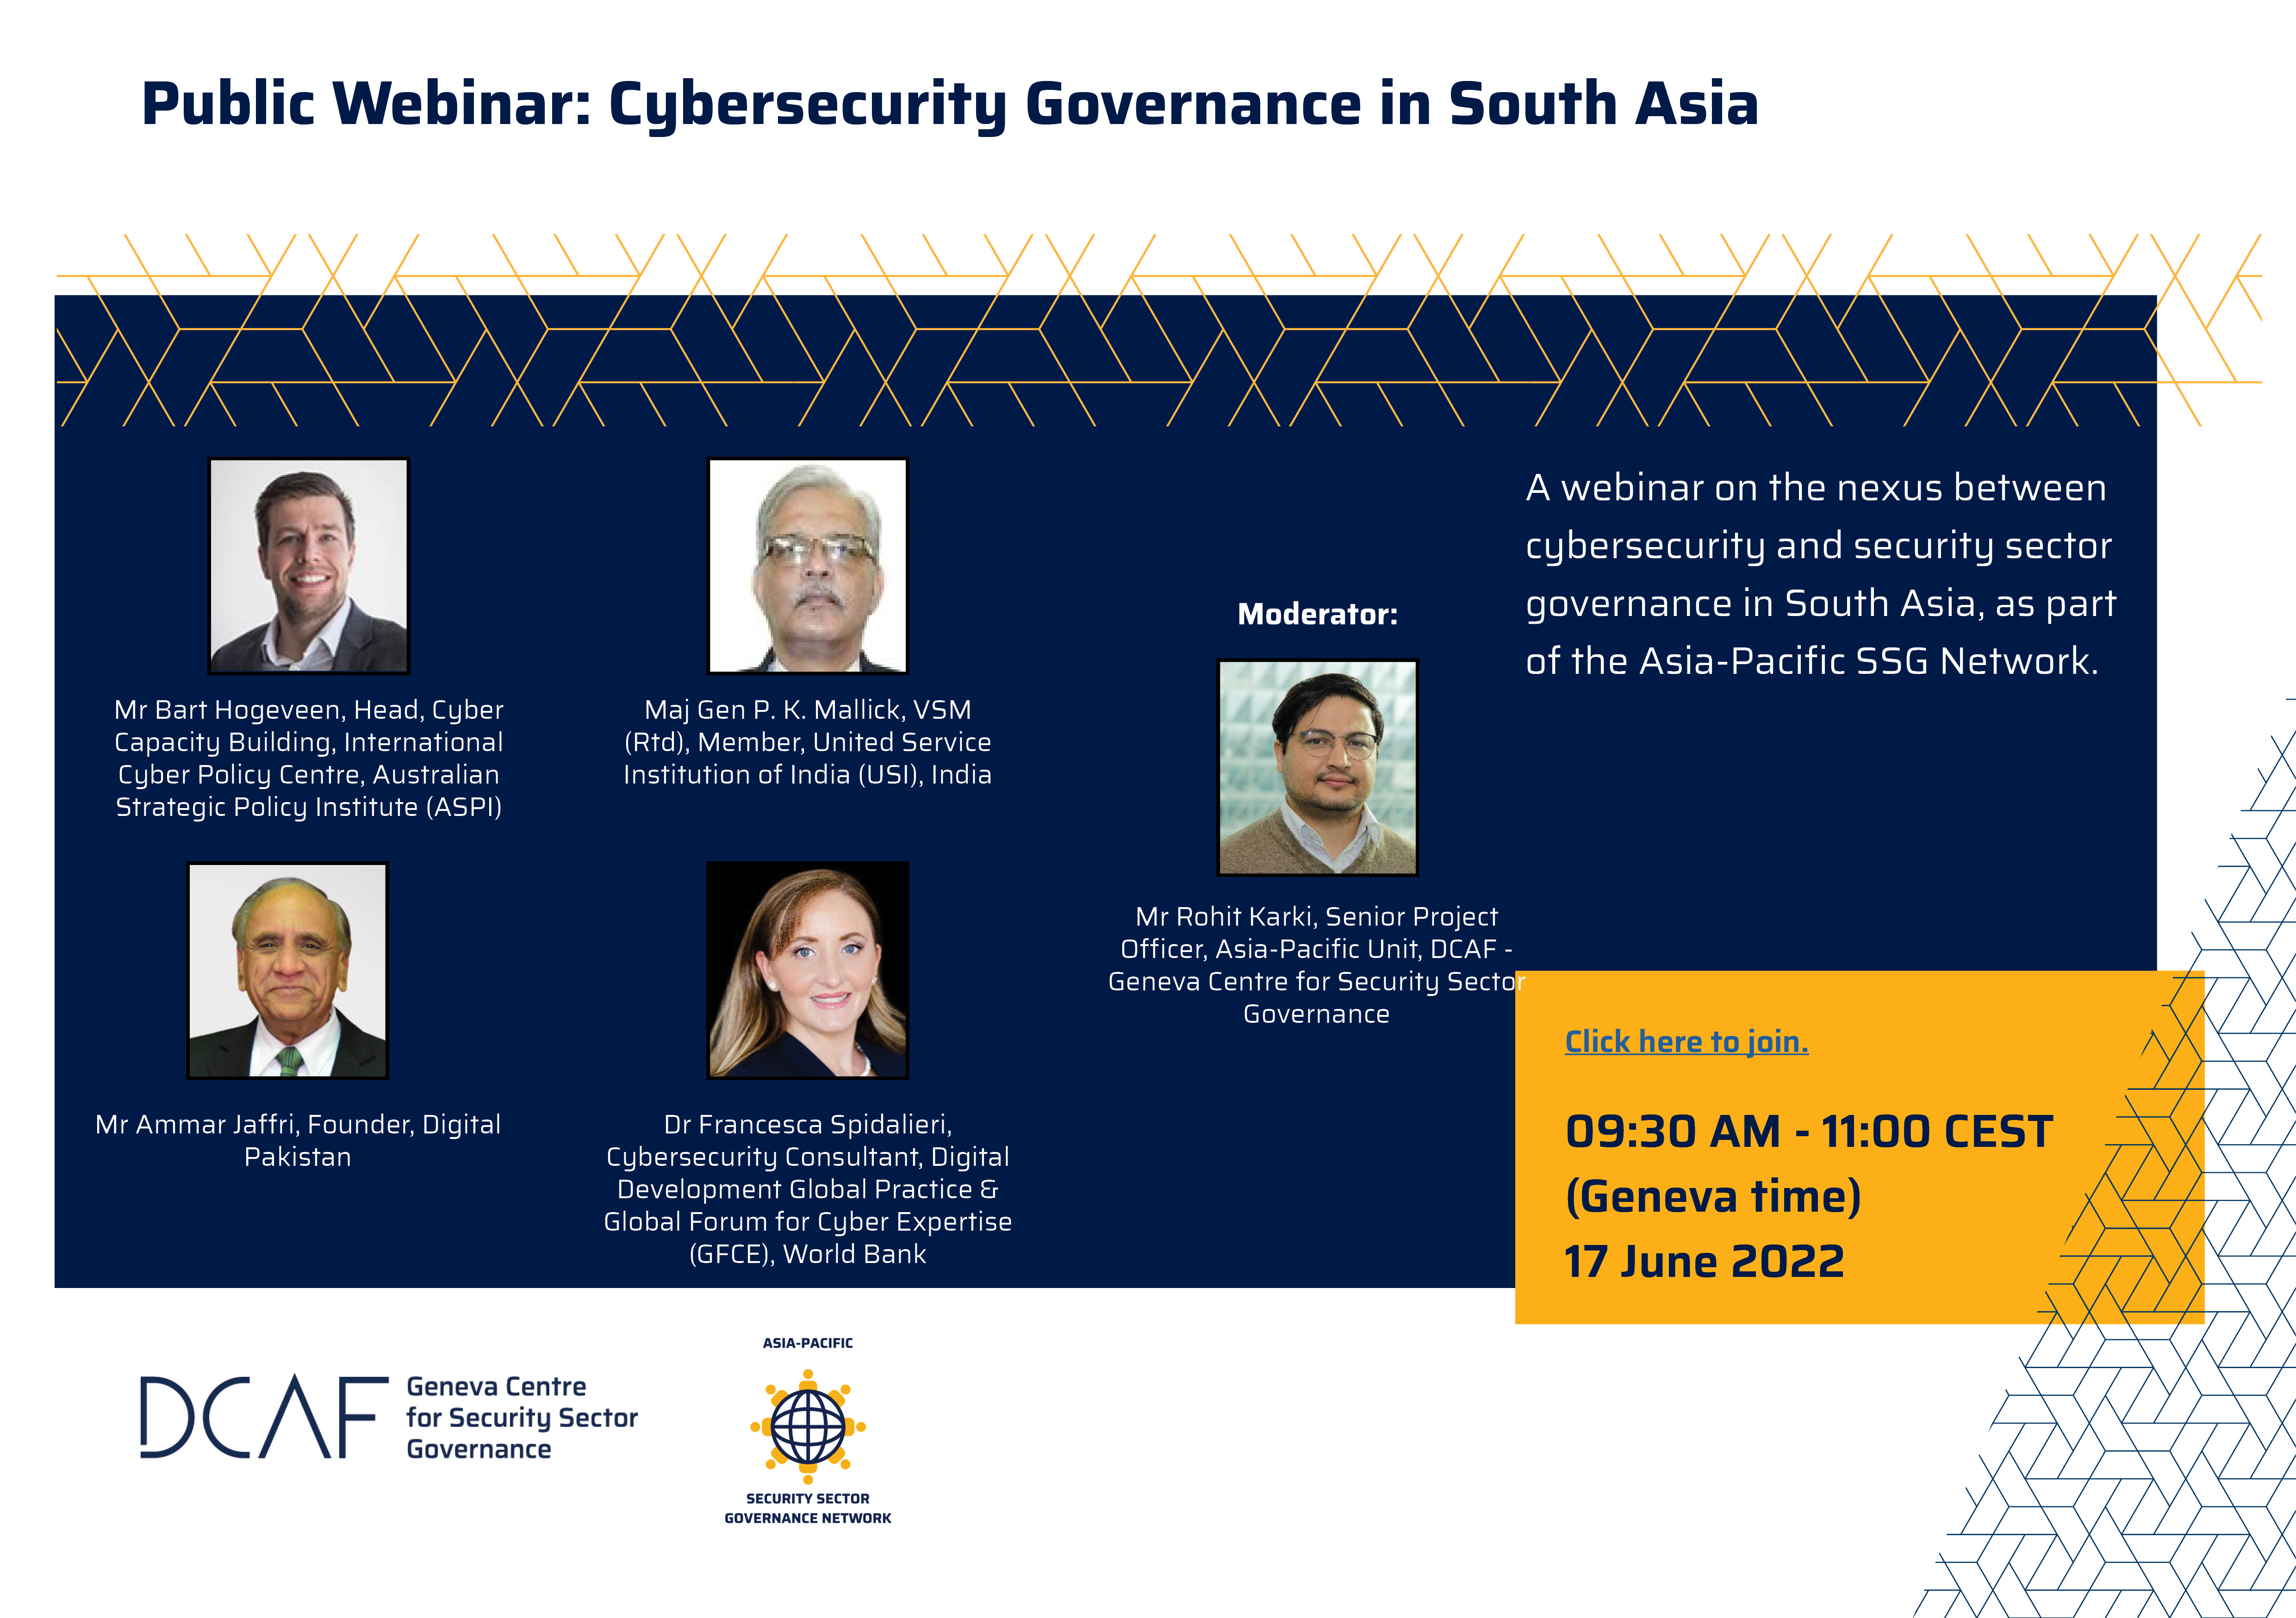 Flyer_Cybersecurity_Governance_in_South_Asia.jpg 